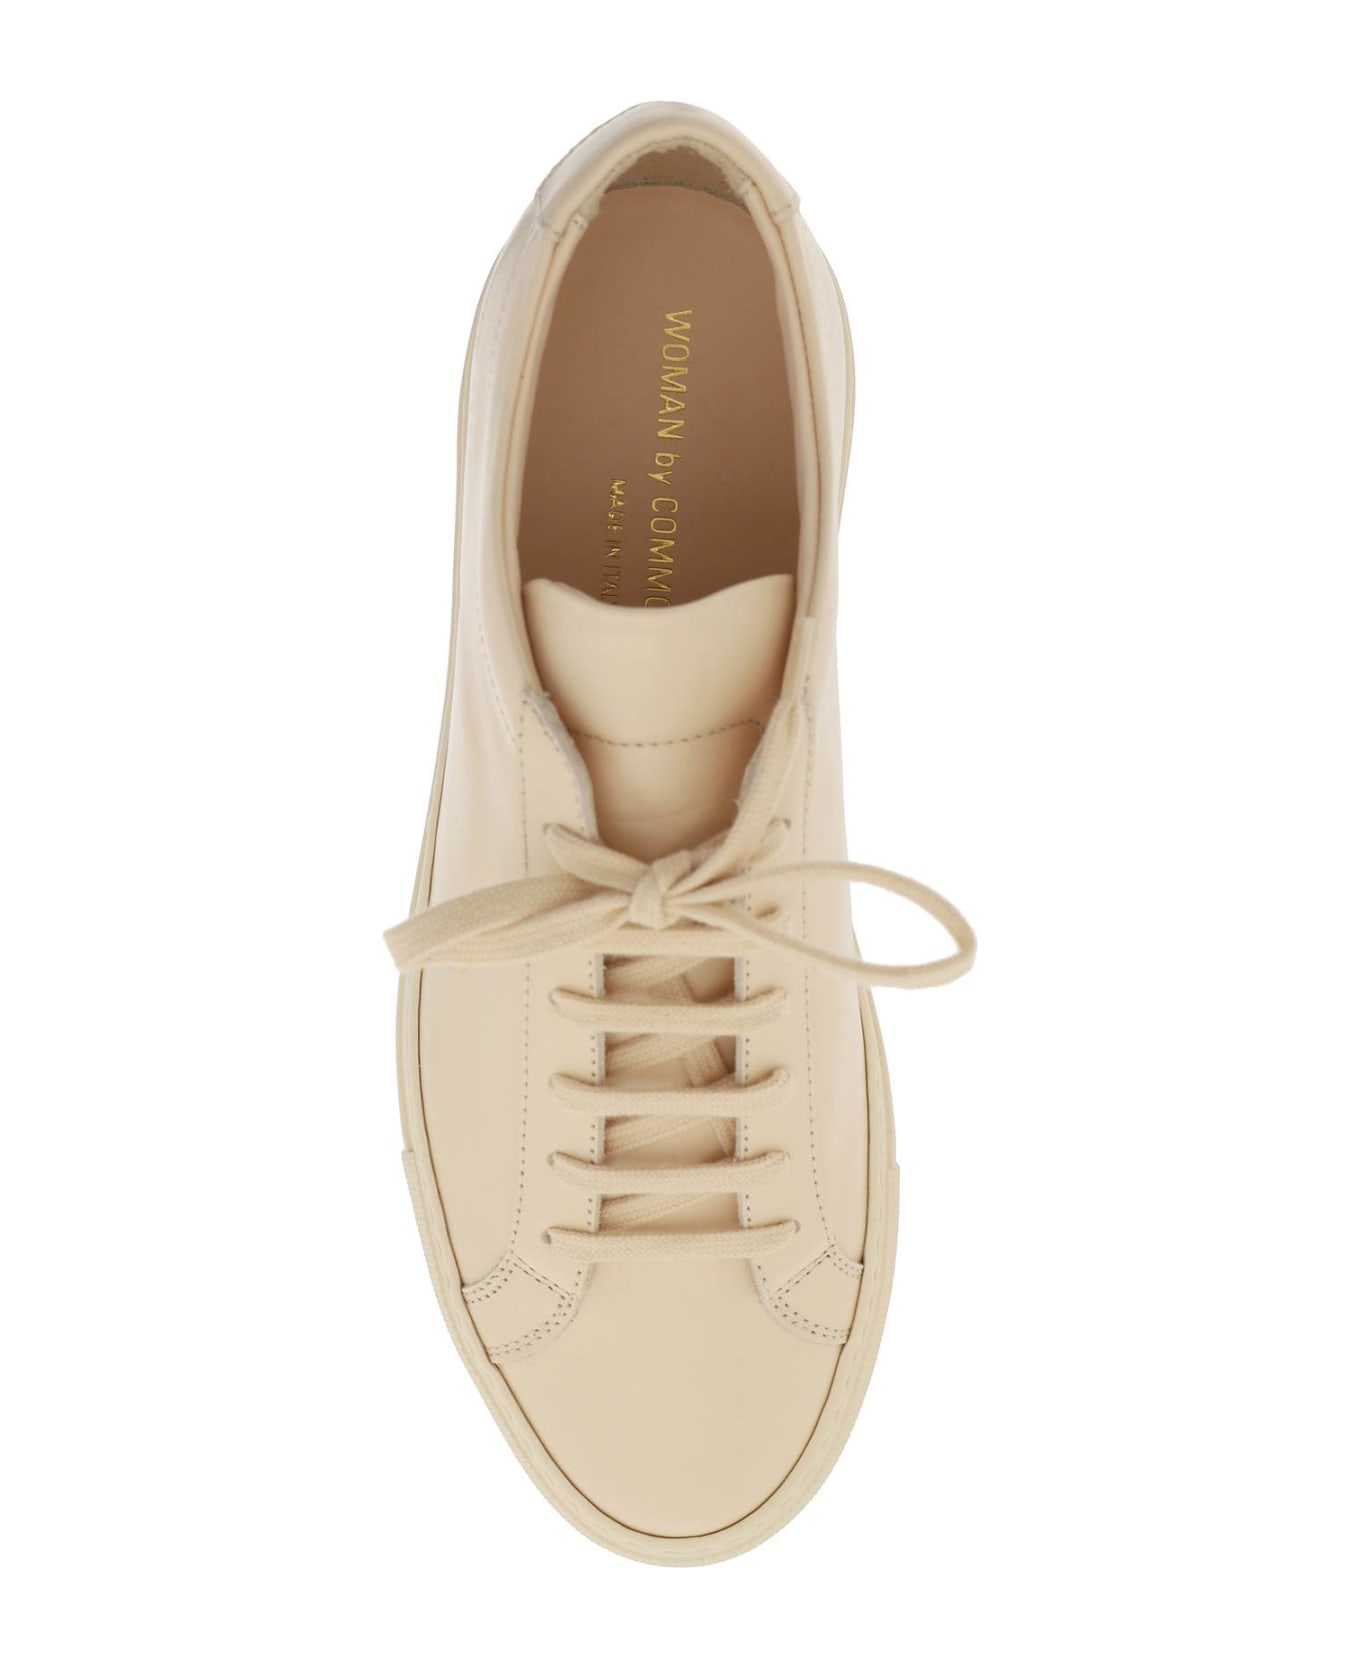 Common Projects Original Achilles Sneakers - APRICOT (Pink)